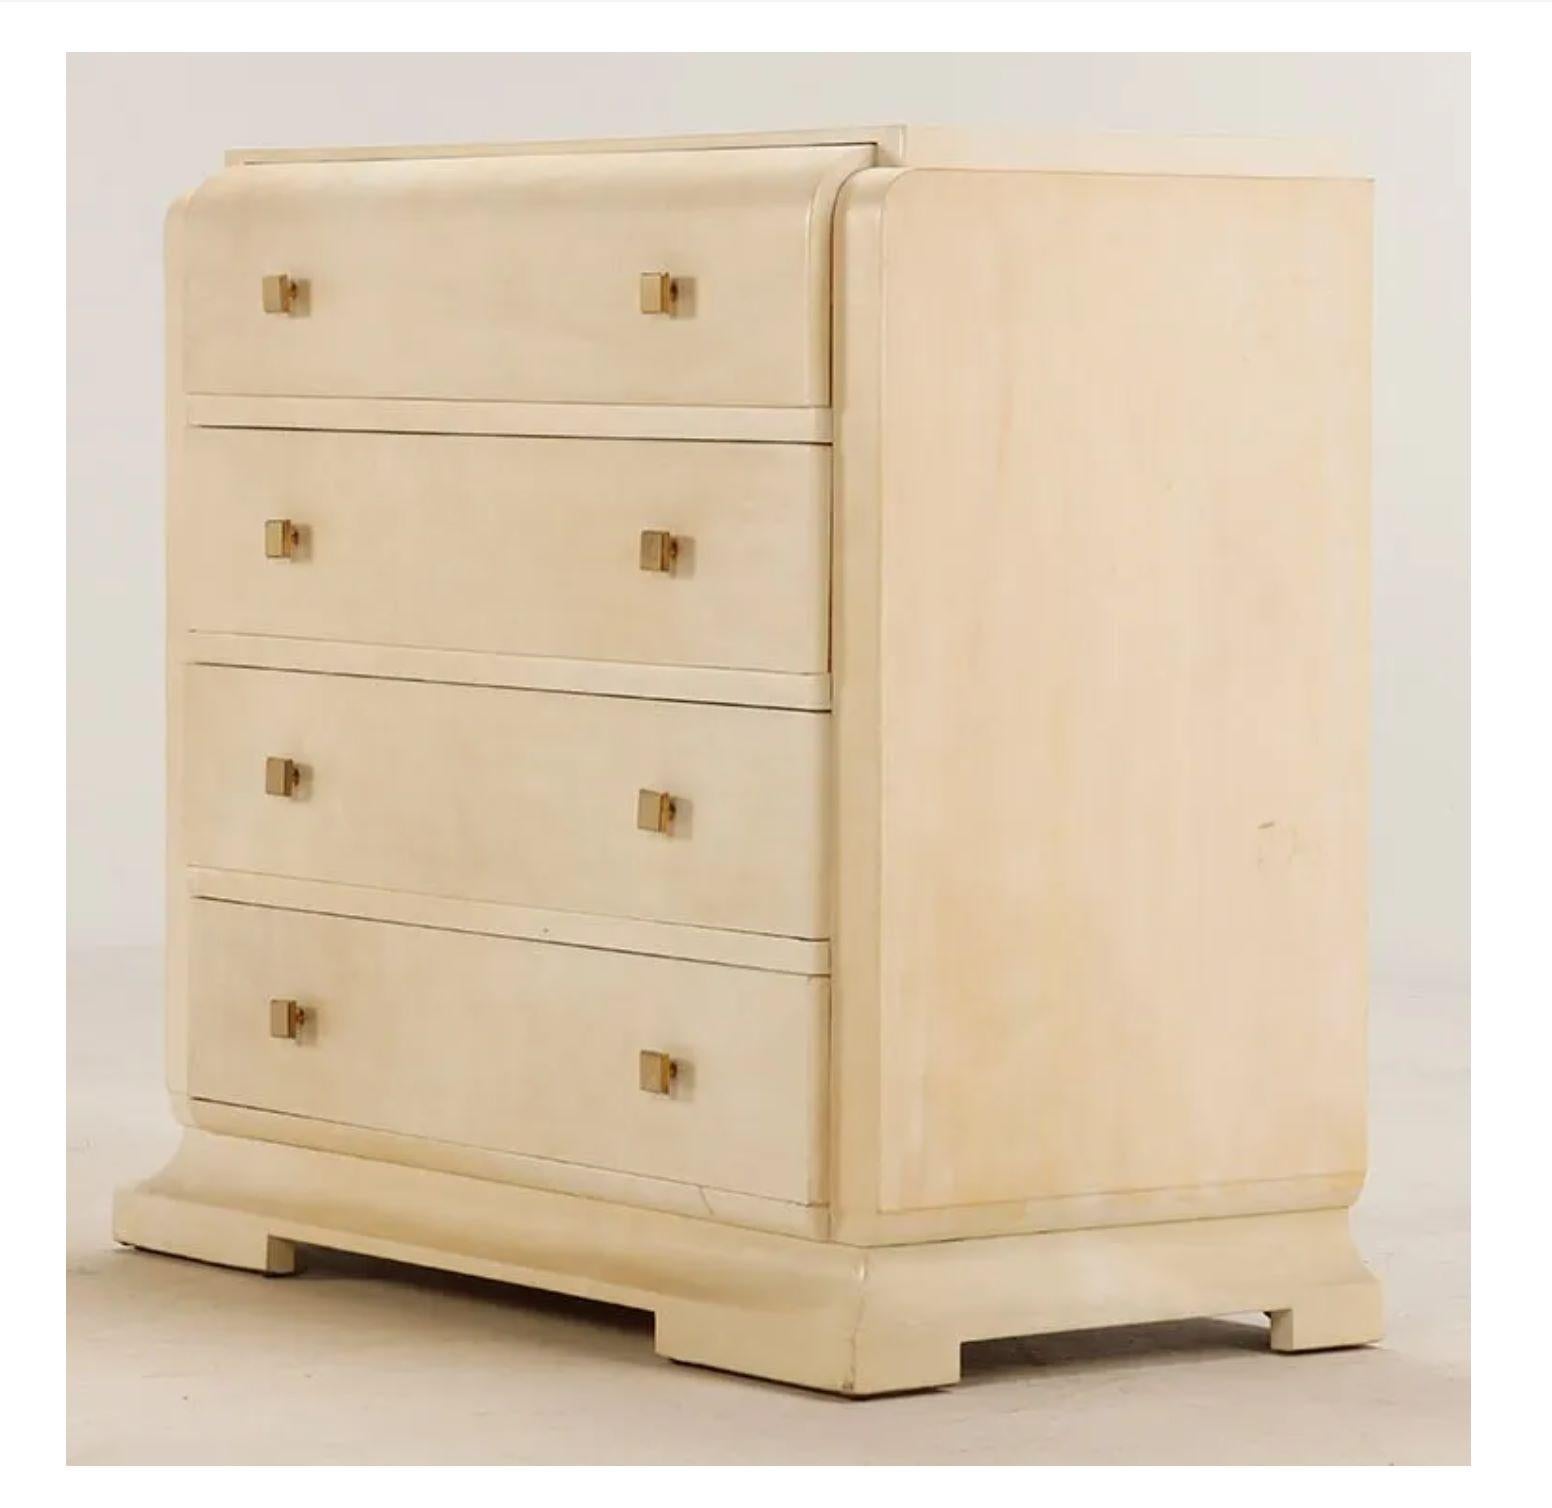 1940s Art Deco parchment dresser in the style of Samuel Marx, with square brass knobs. Four (4) drawers sit atop an architectural base, the top drawer has a beautiful curved waterfall detail at the top. 